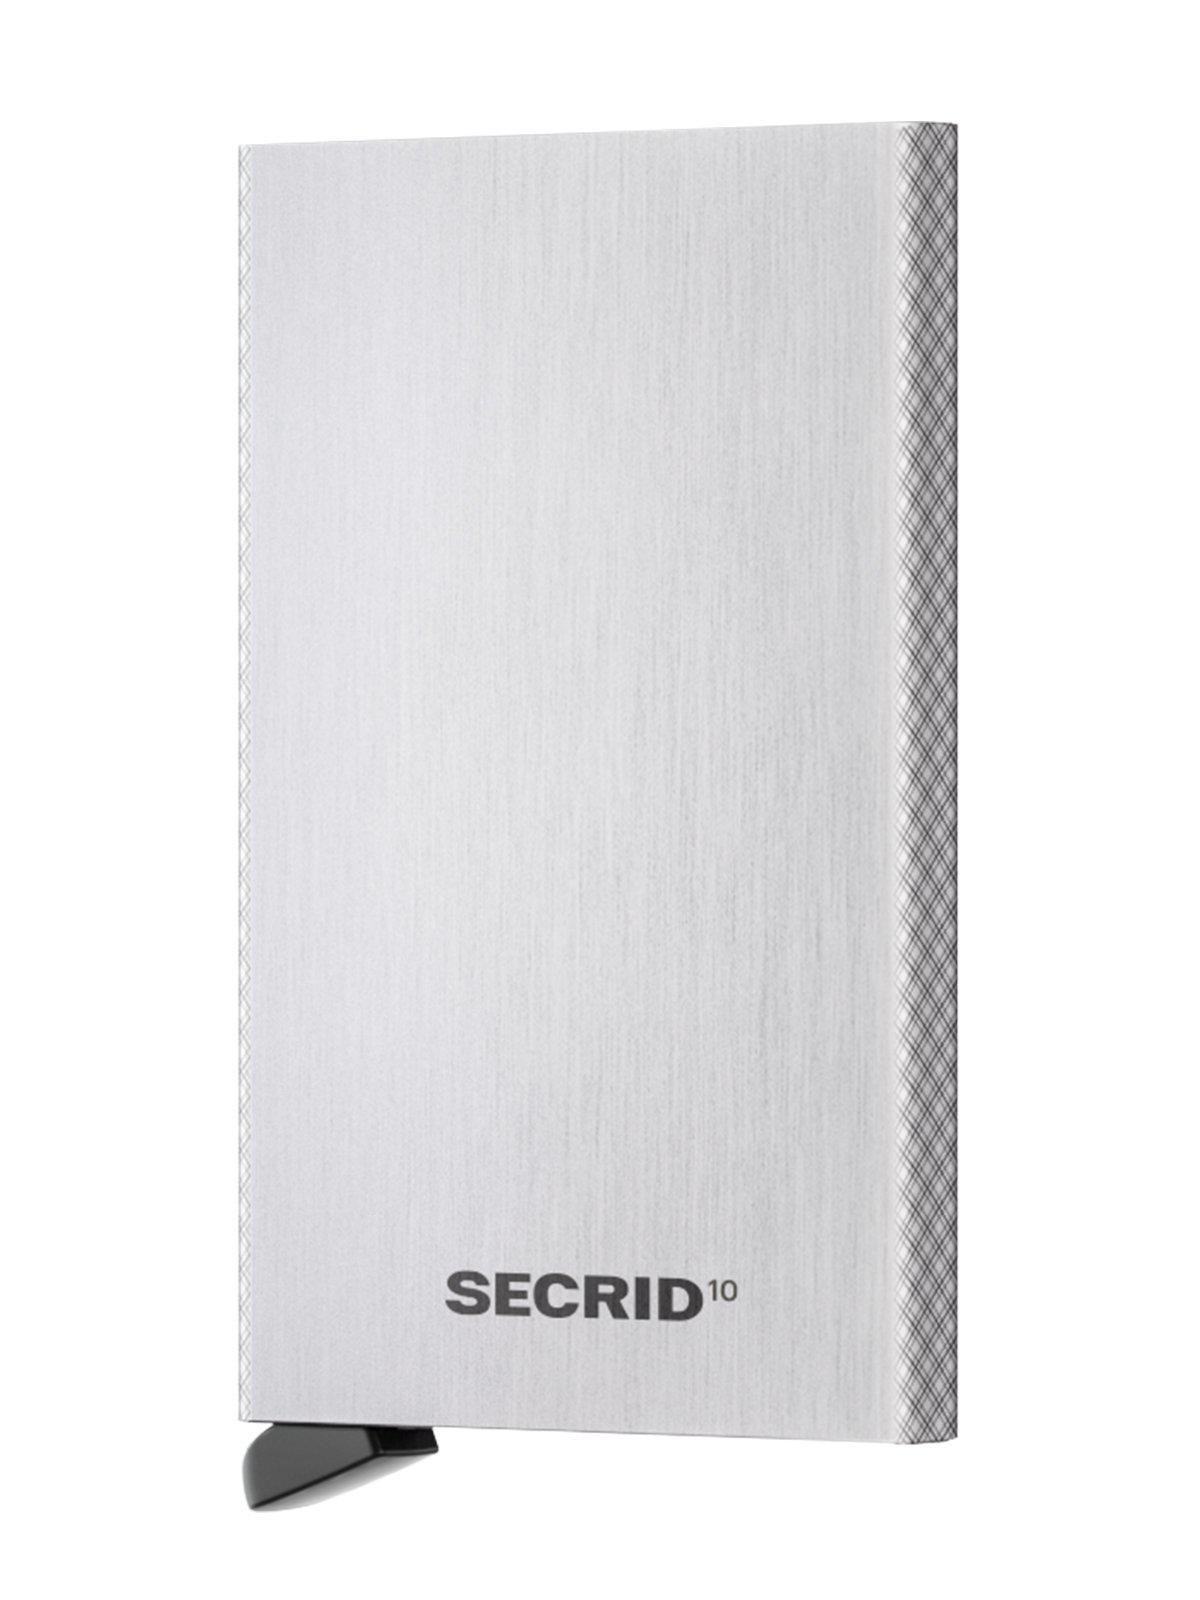 Secrid Cardprotector 10 Limited